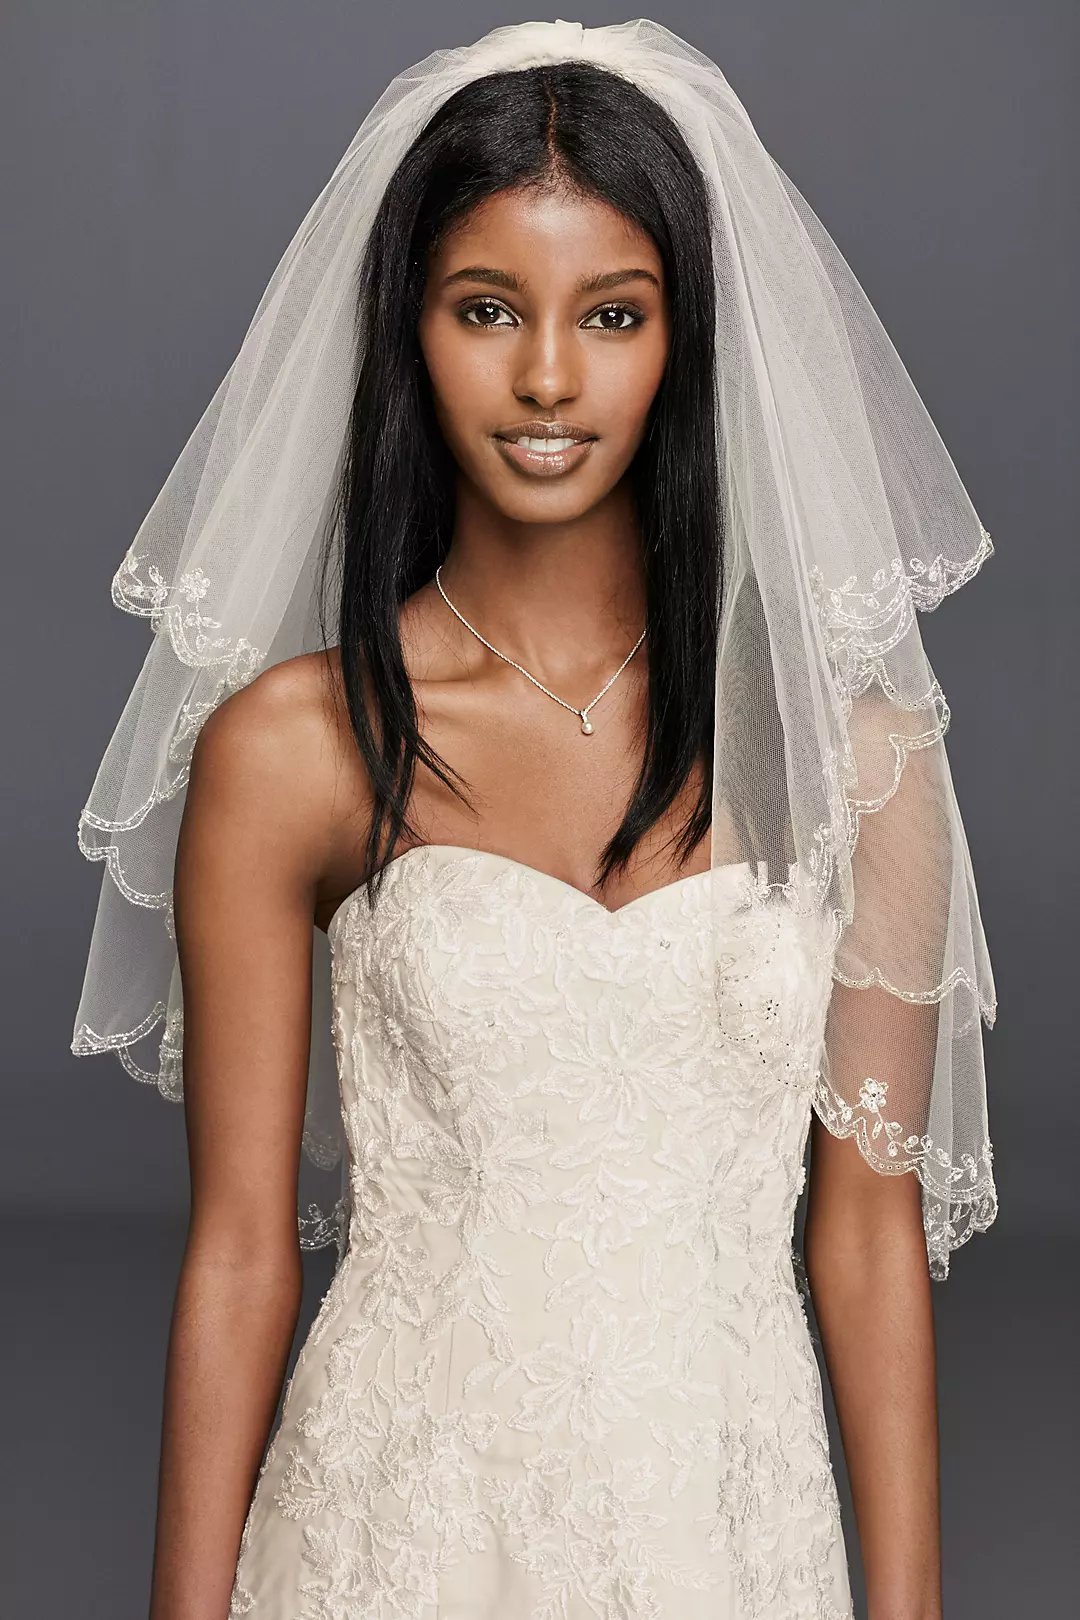 Fingertip Length Two-Tier Veil with Scallop Edge Image